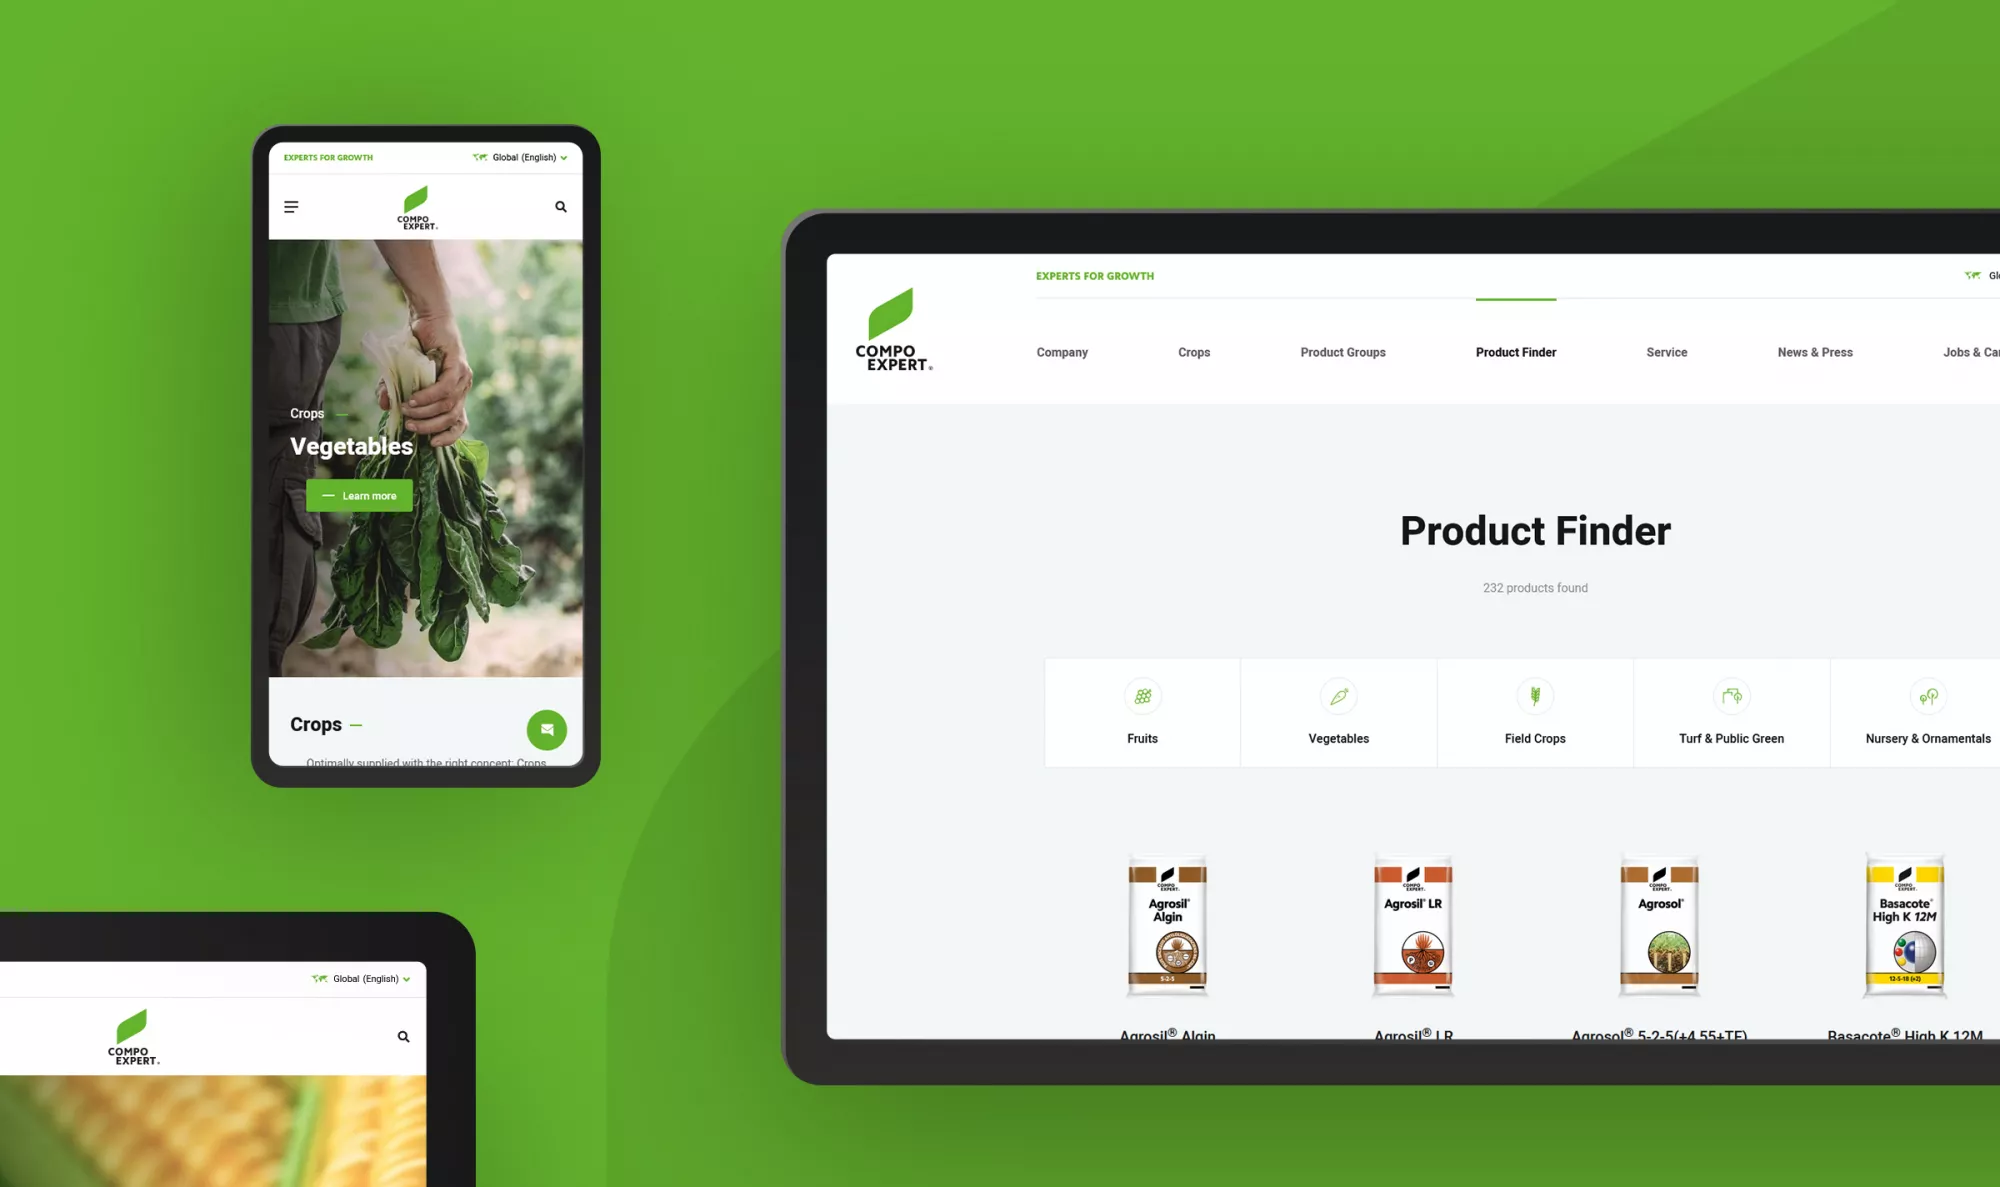 Compo Expert Product Finder